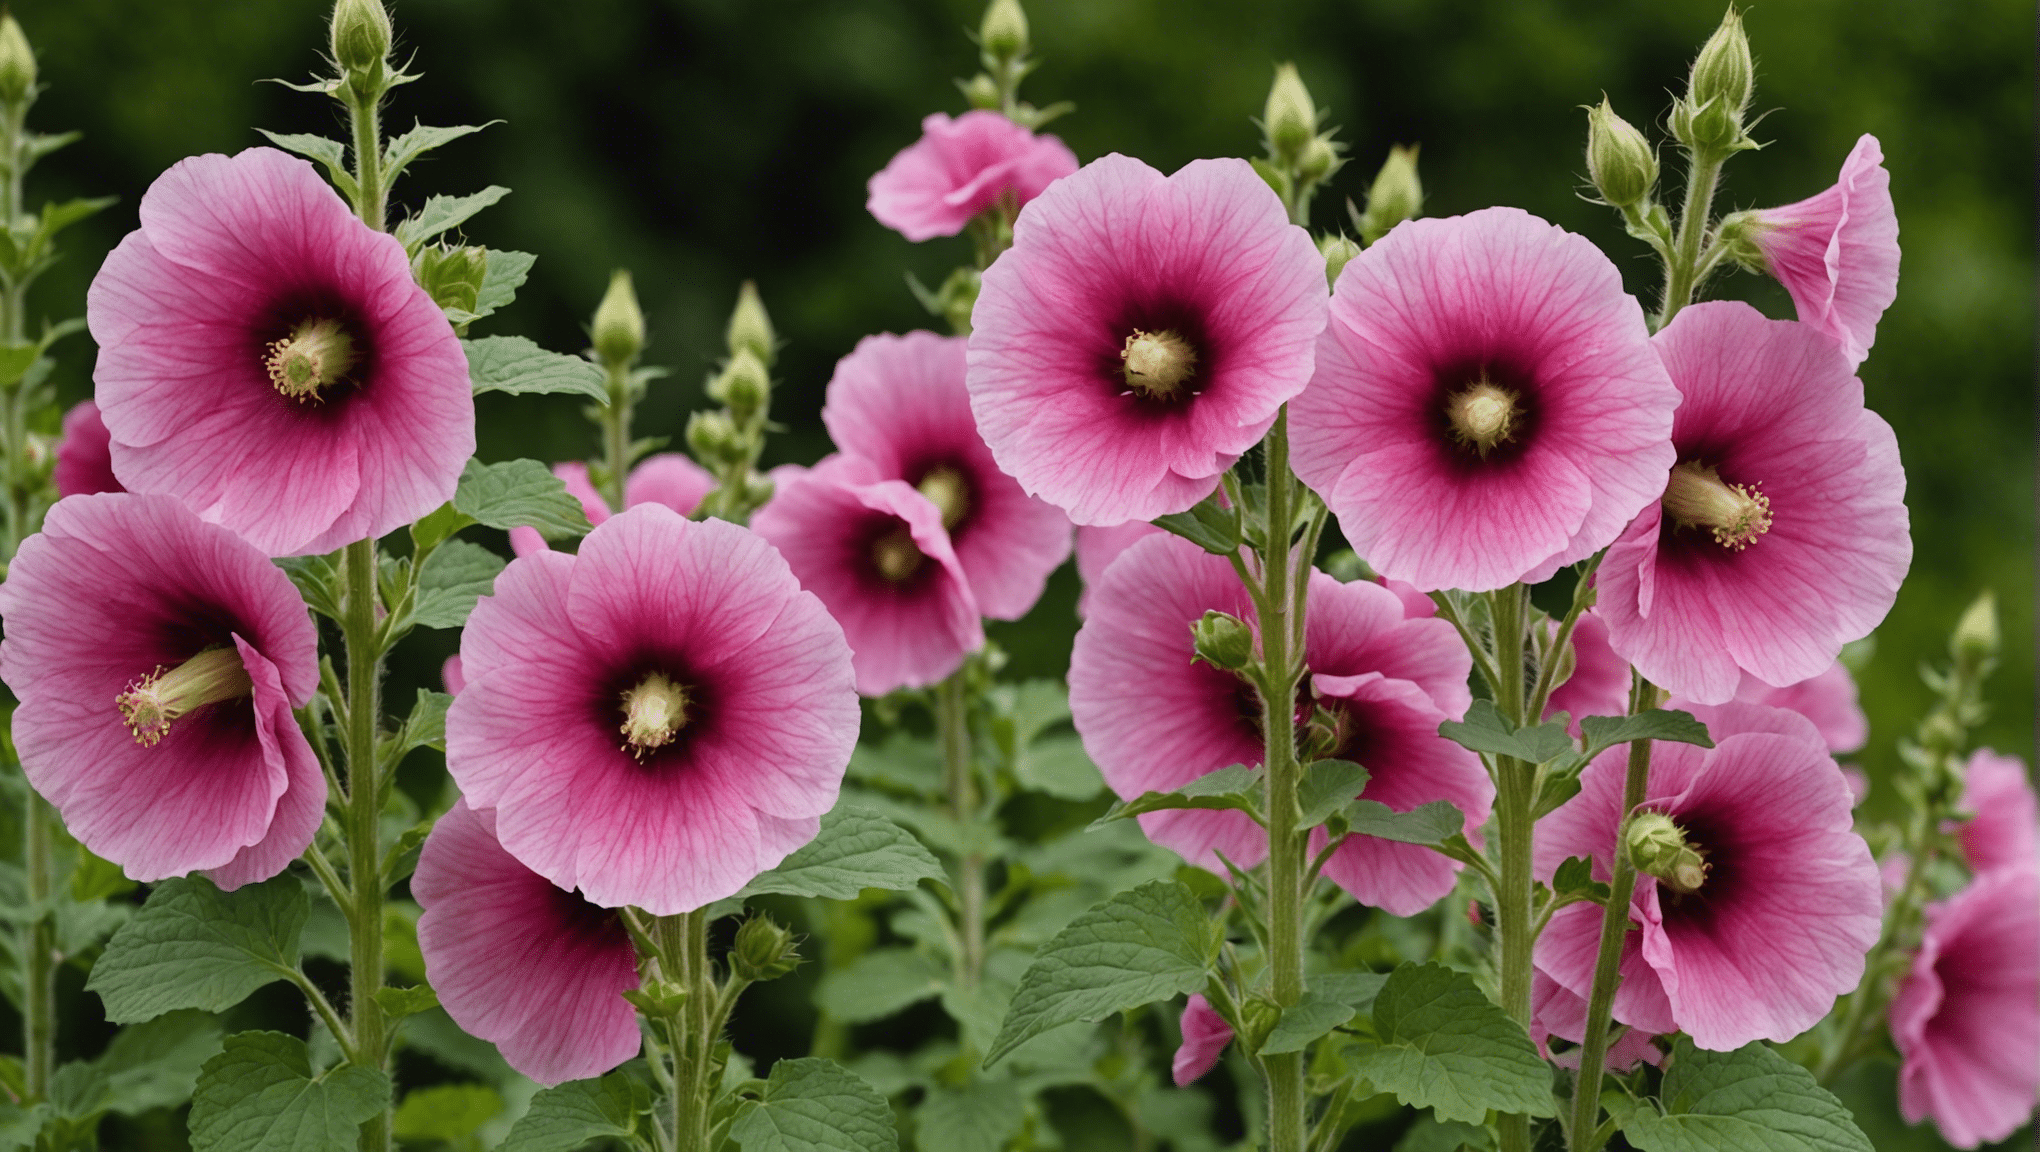 learn how to plant and grow hollyhock seeds with our step-by-step guide. find out the best time to sow hollyhock seeds, the proper soil, and watering requirements for successful hollyhock garden.